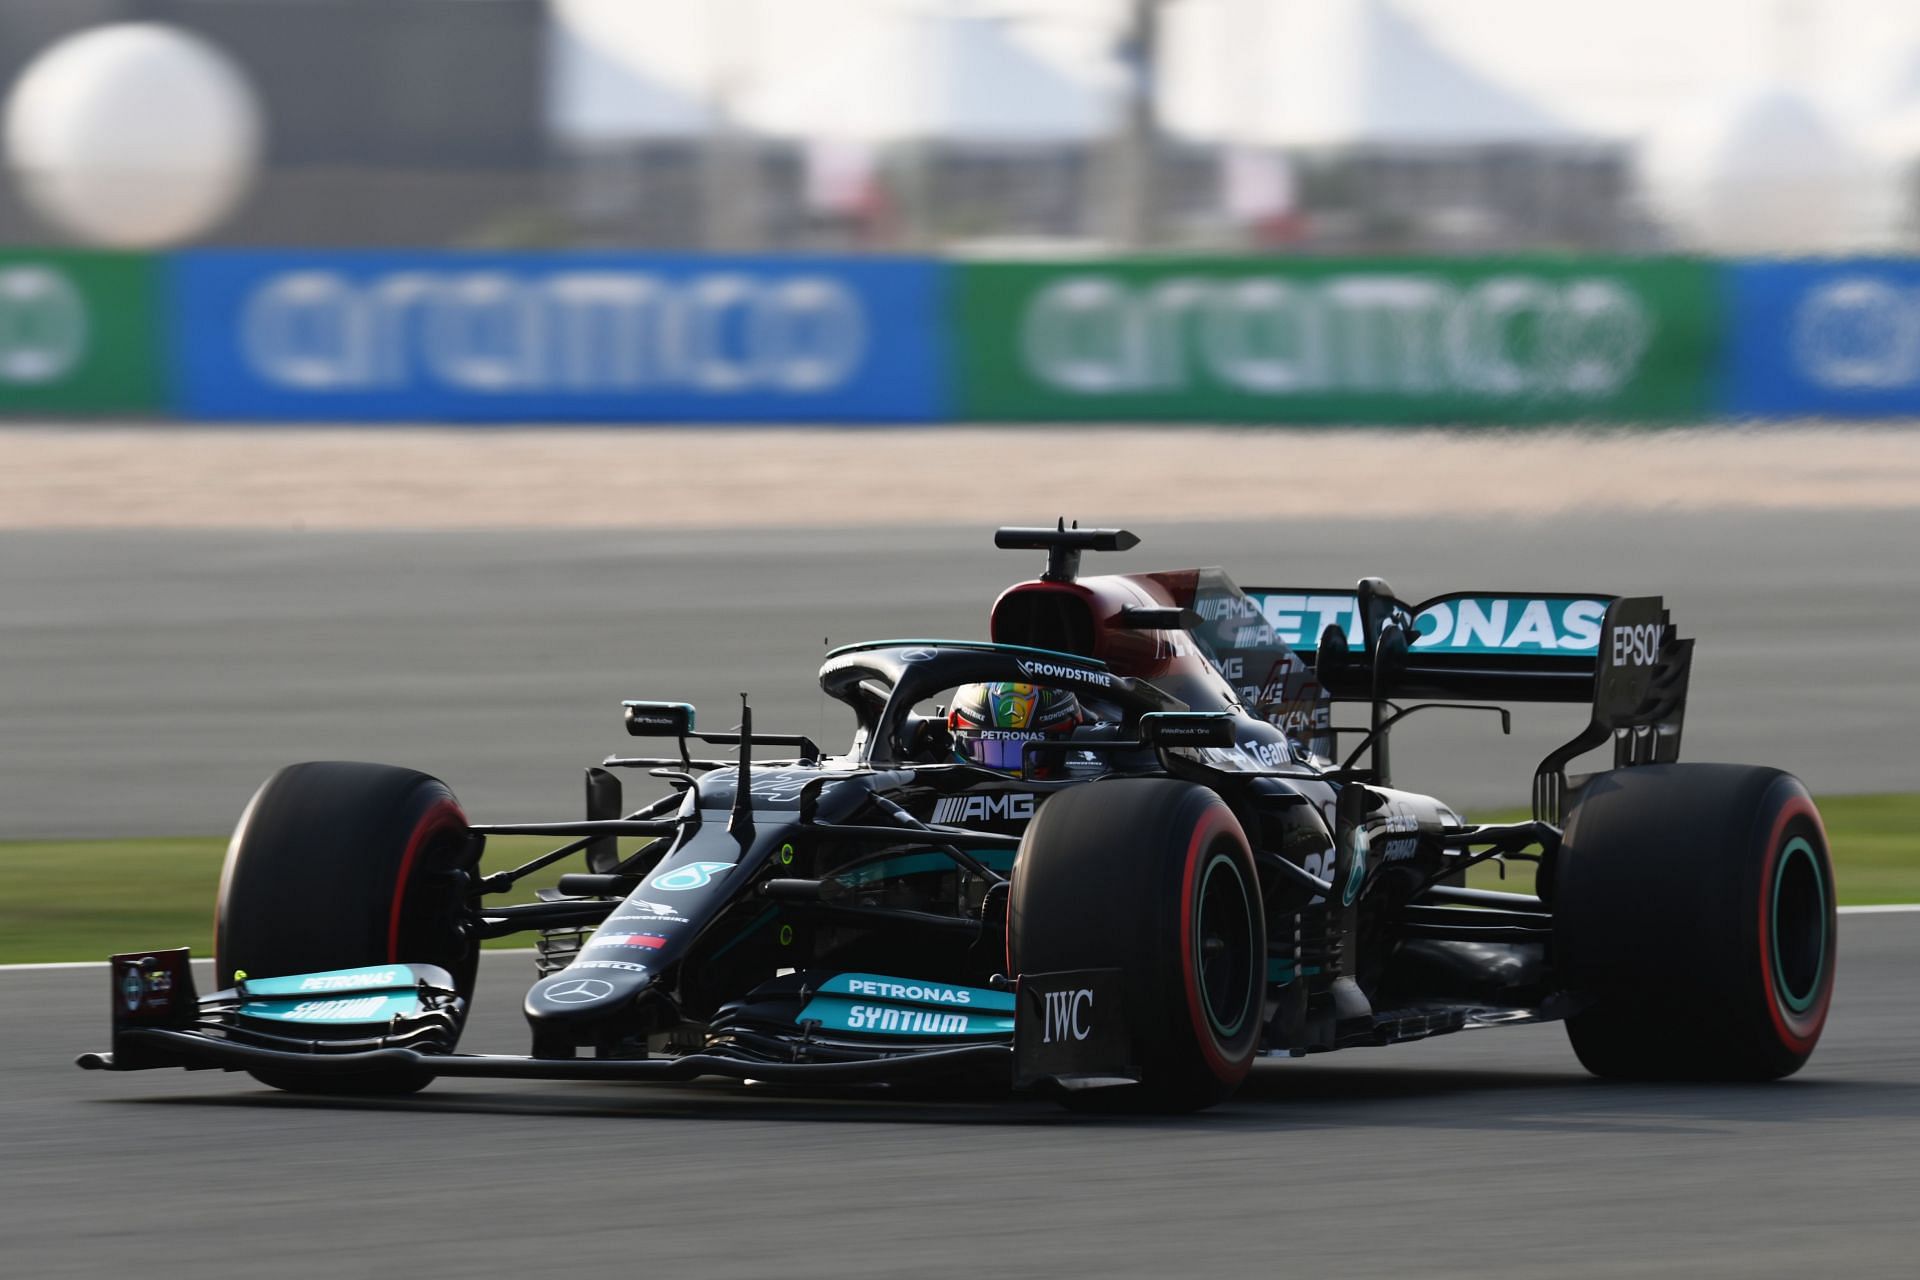 Lewis Hamilton was investigated for a rear wing technical infringement in Brazil